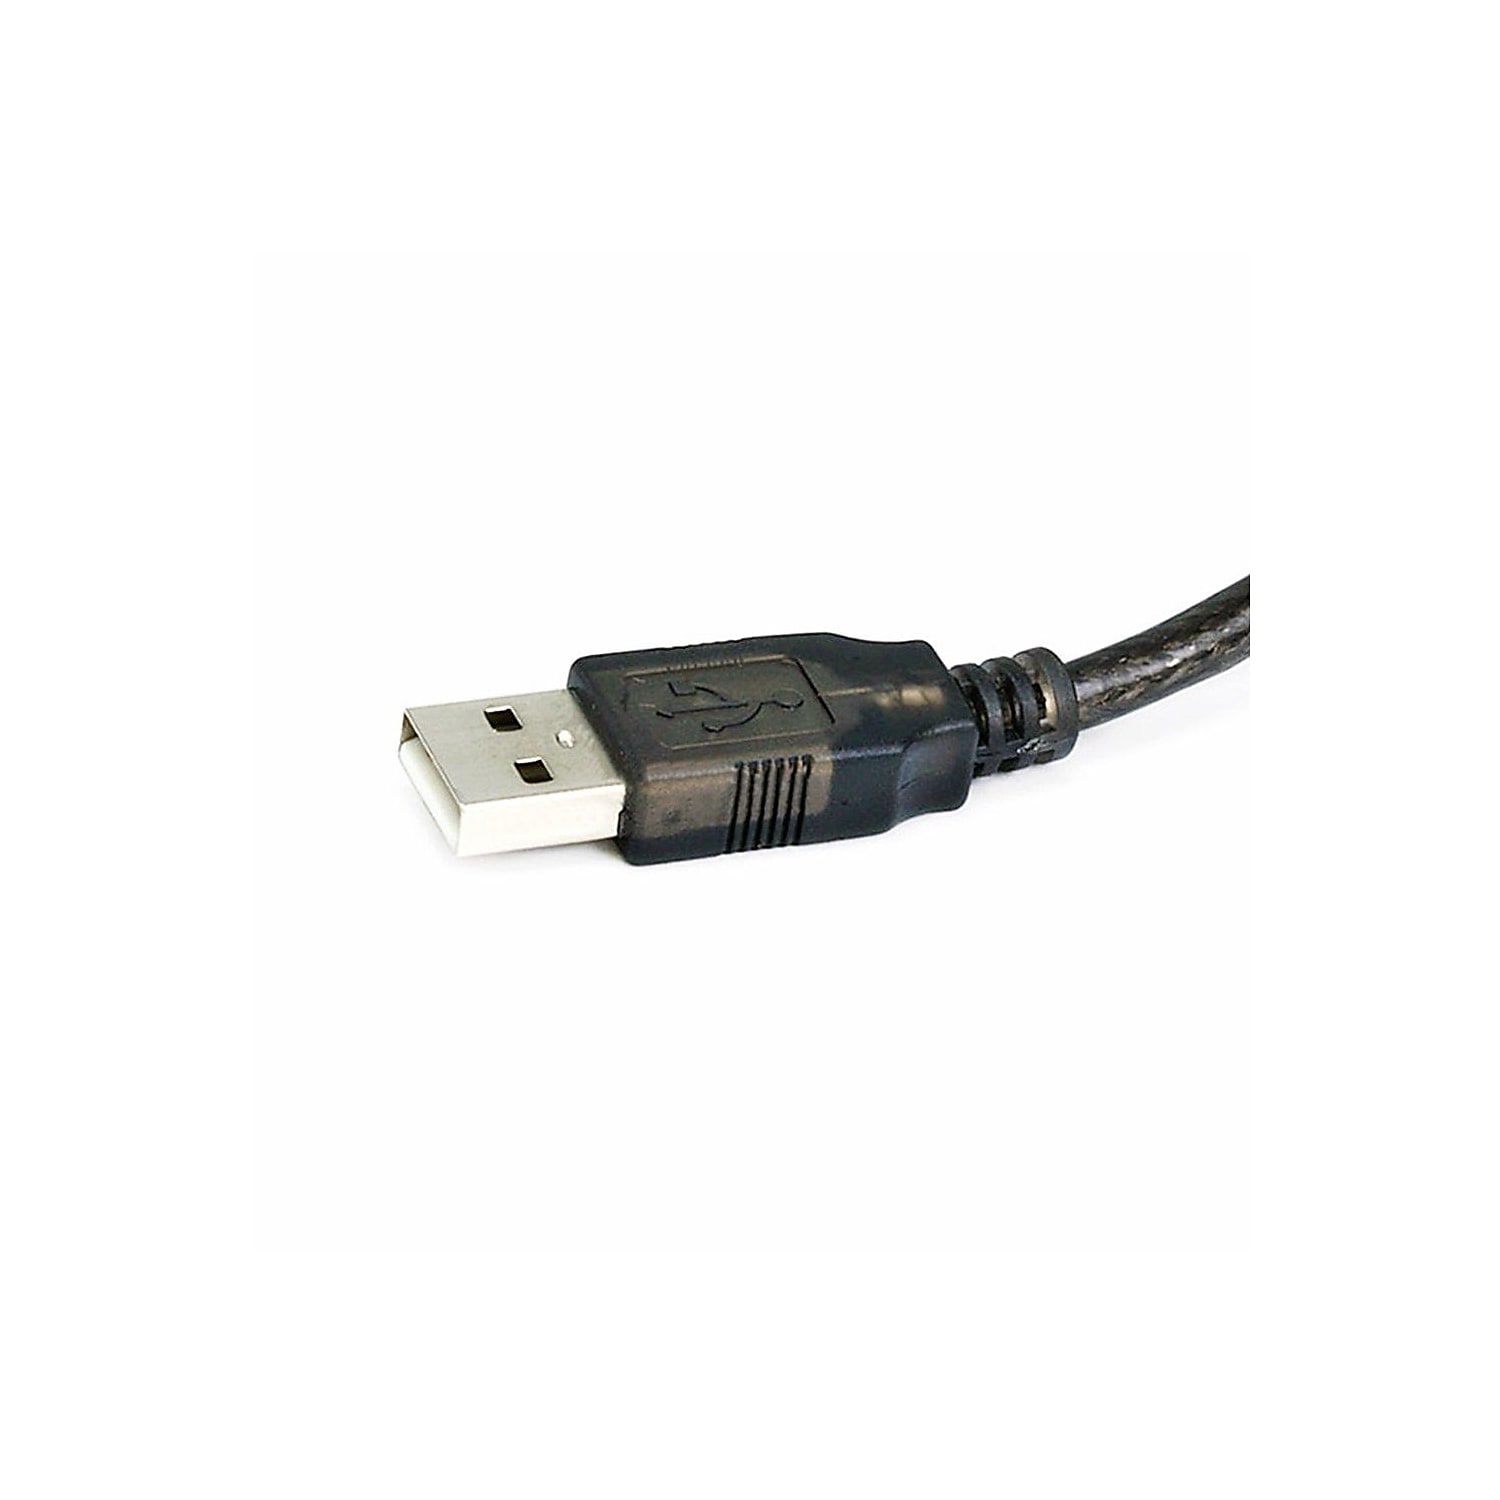 Monoprice USB Data Transfer Cable - image 2 of 3